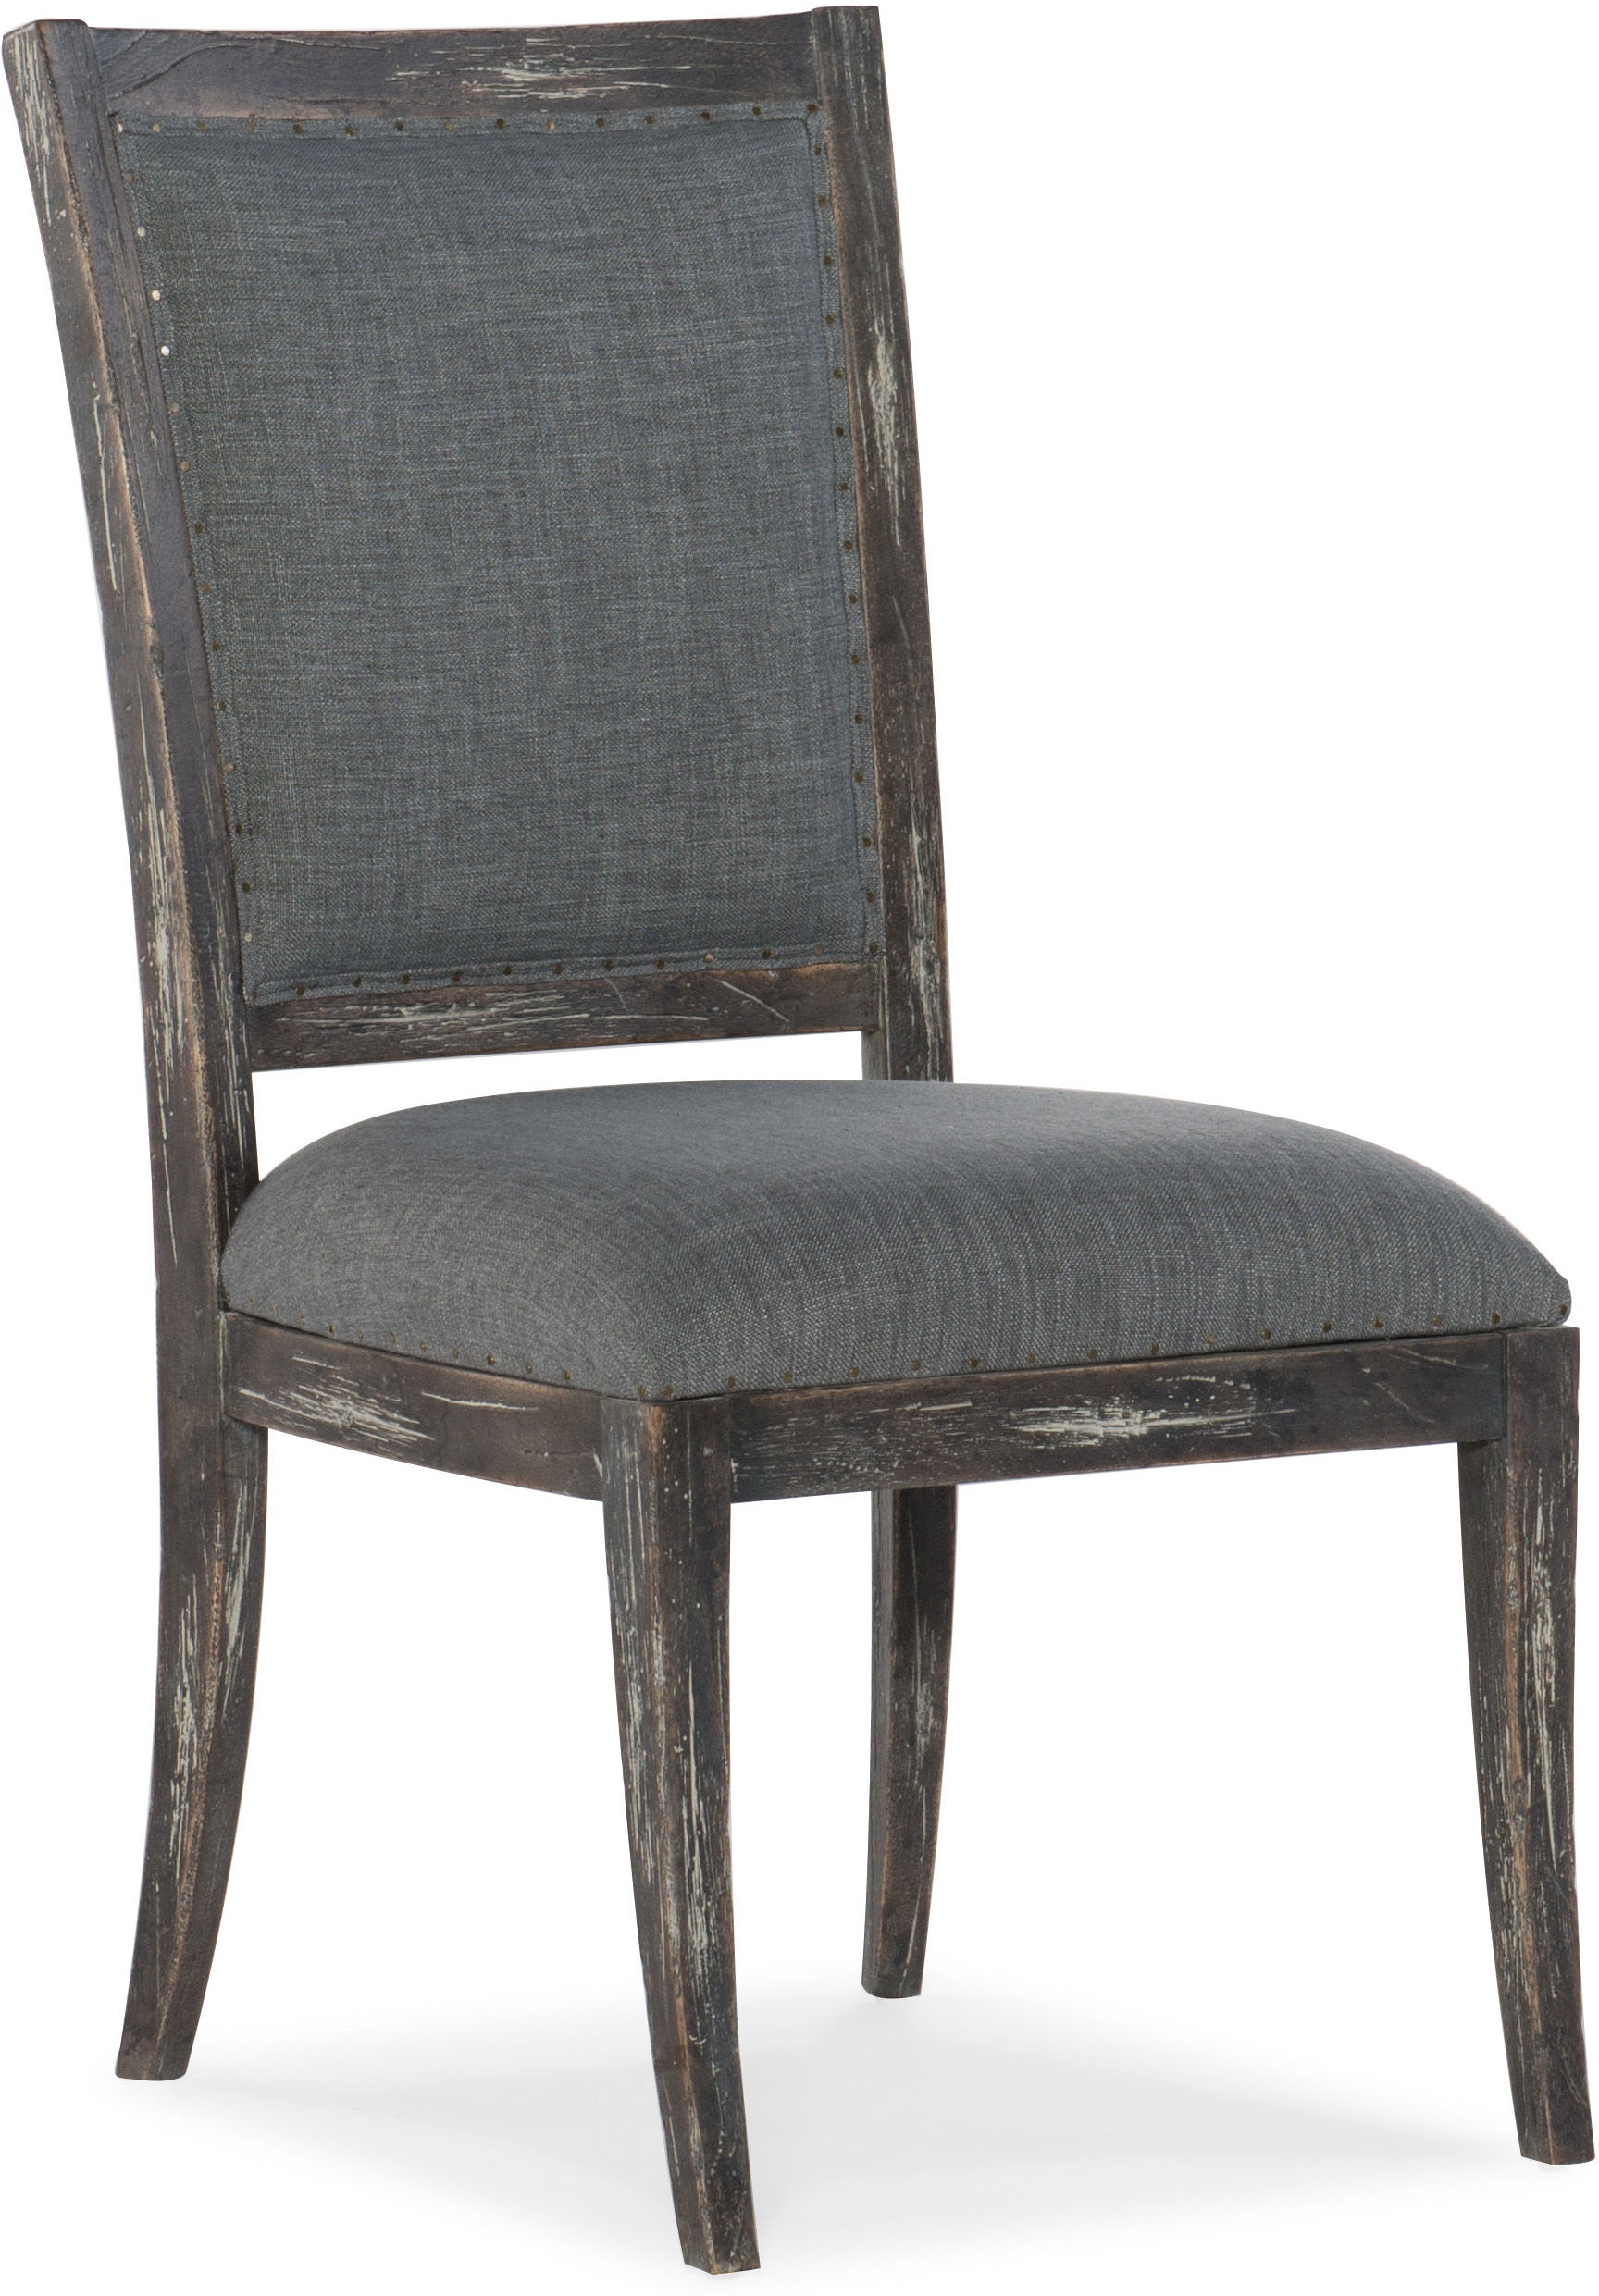 Hooker Furniture Dining Room Beaumont Upholstered Side Chair 2 Per Carton Price Ea 5751 75410 89